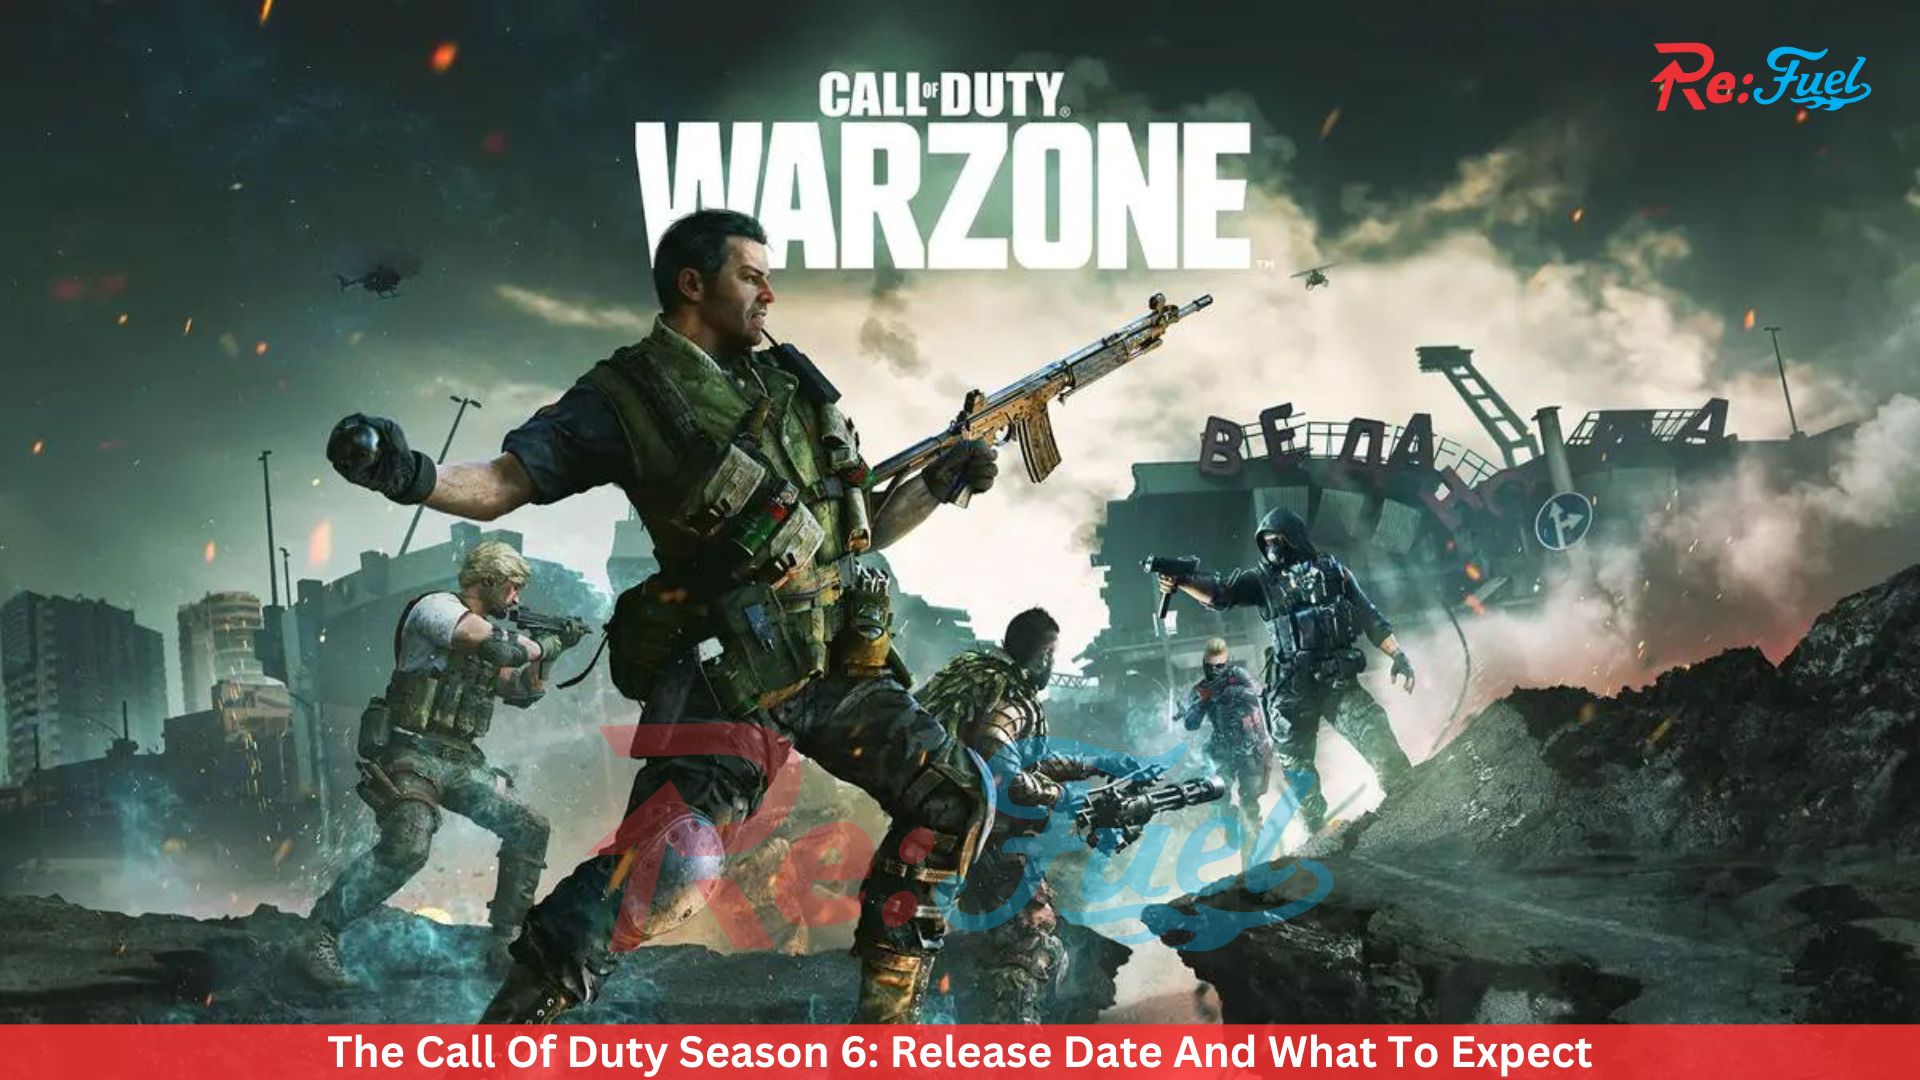 The Call Of Duty Season 6: Release Date And What To Expect